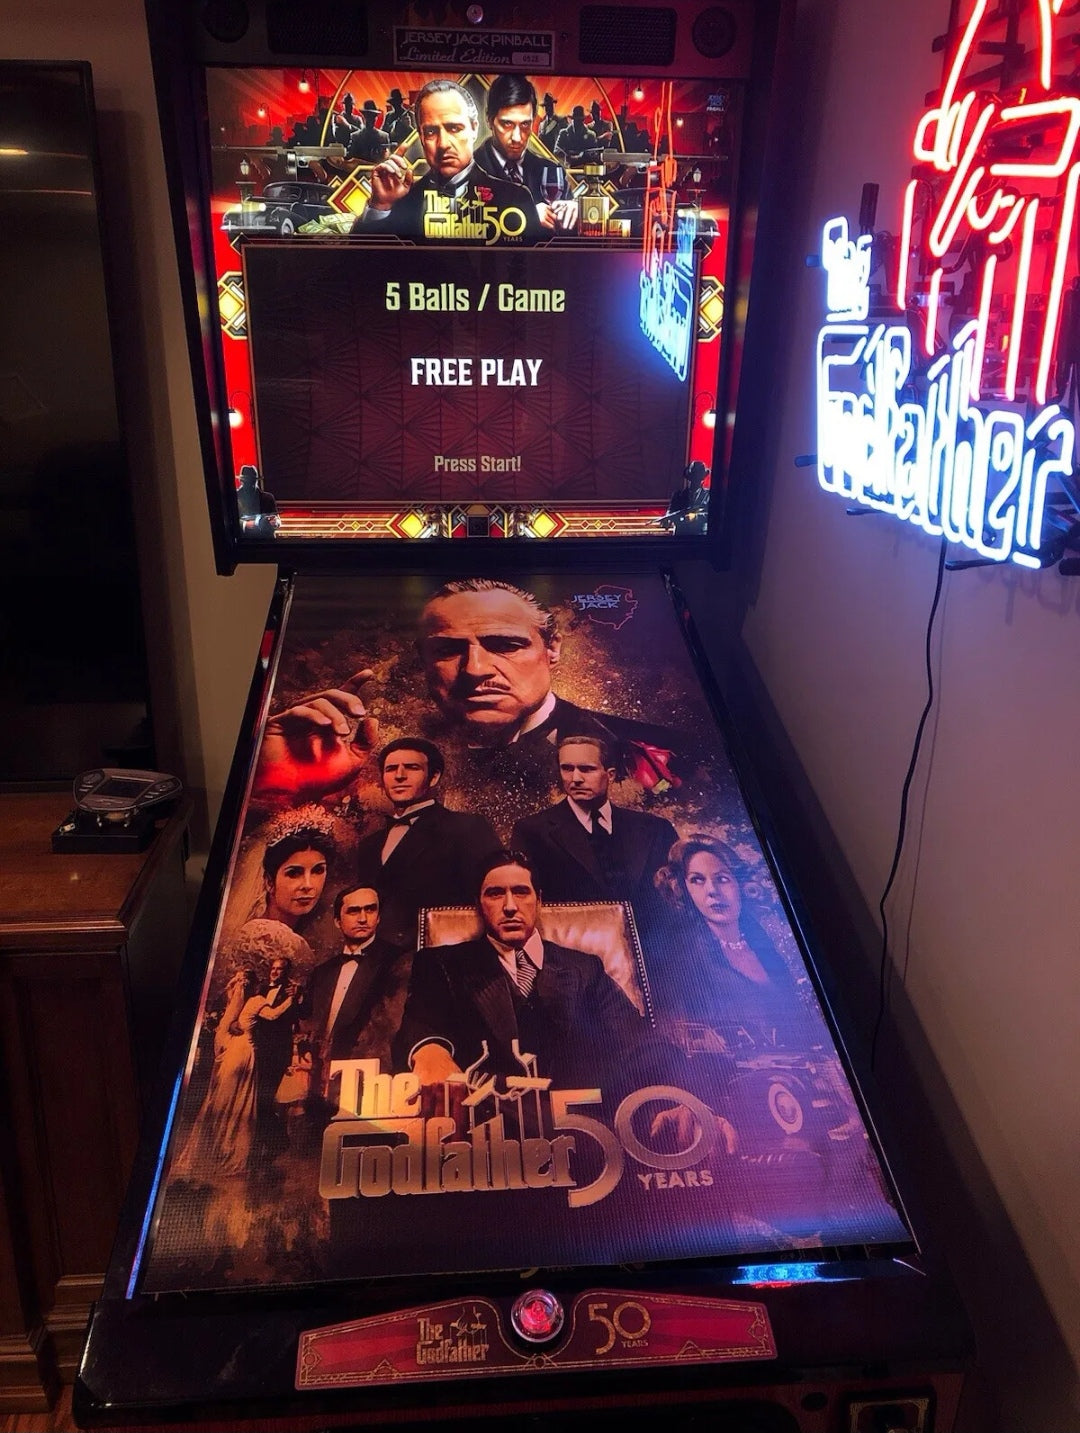 Pinball cover protection glass The Godfather